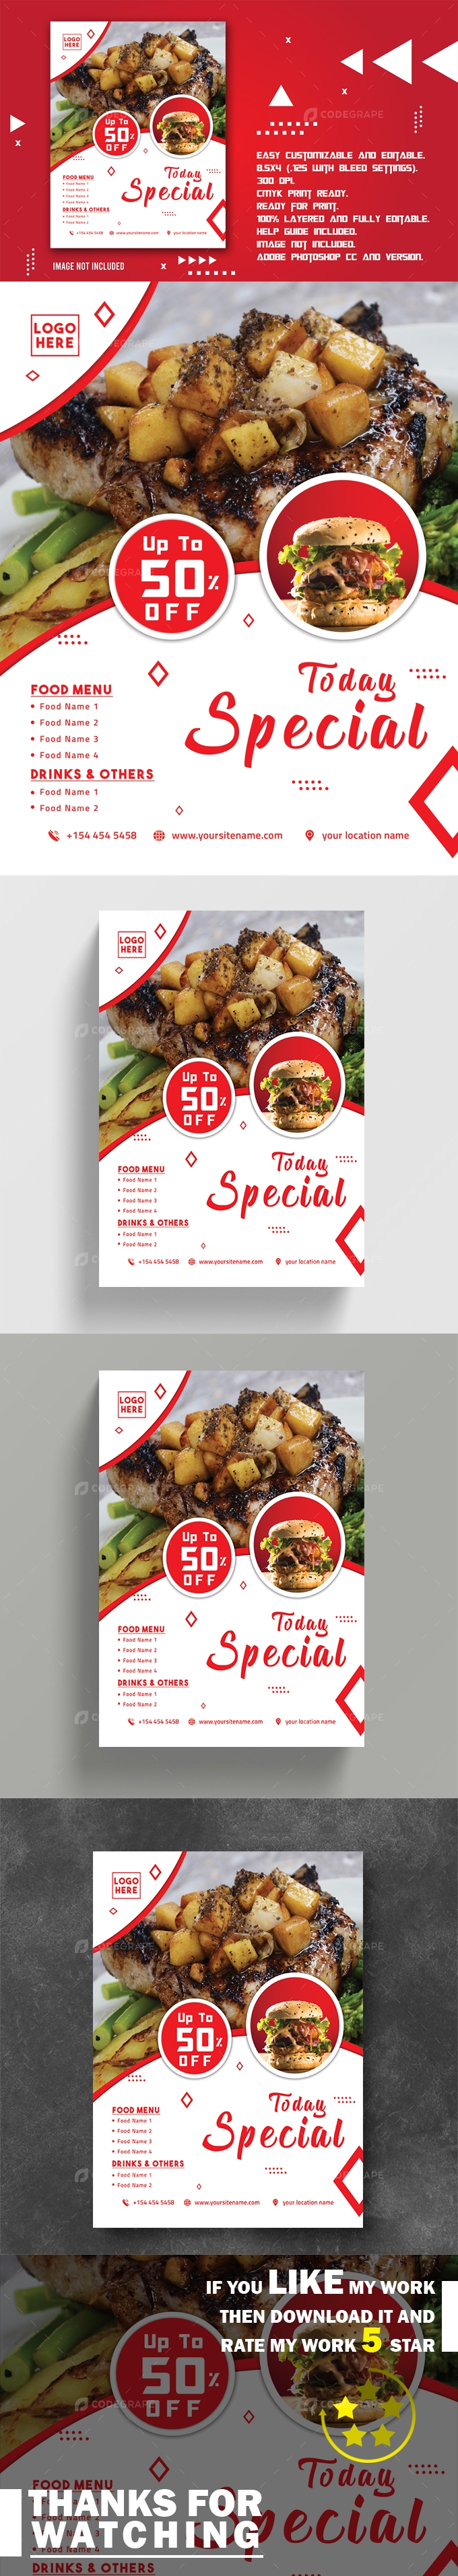 Special Food Promotional Flyer Template